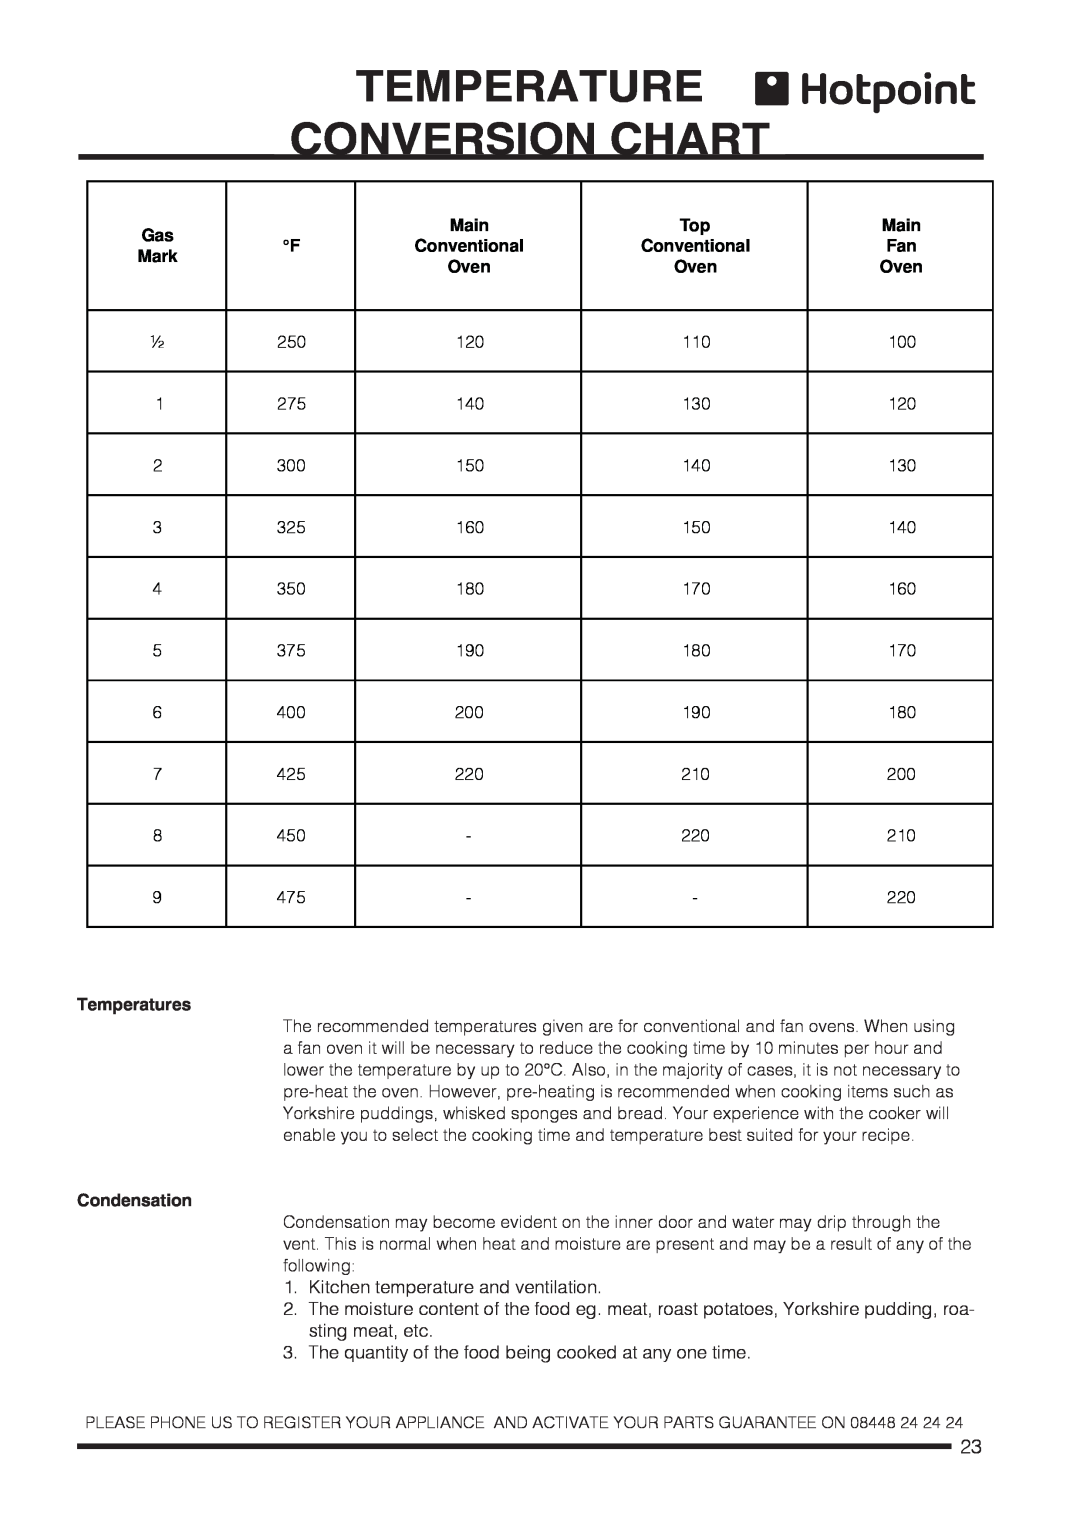 Hotpoint CH60DTXFS Temperature Conversion Chart, Gas Mark, Main Conventional Oven, Top Conventional Oven, Main Fan Oven 